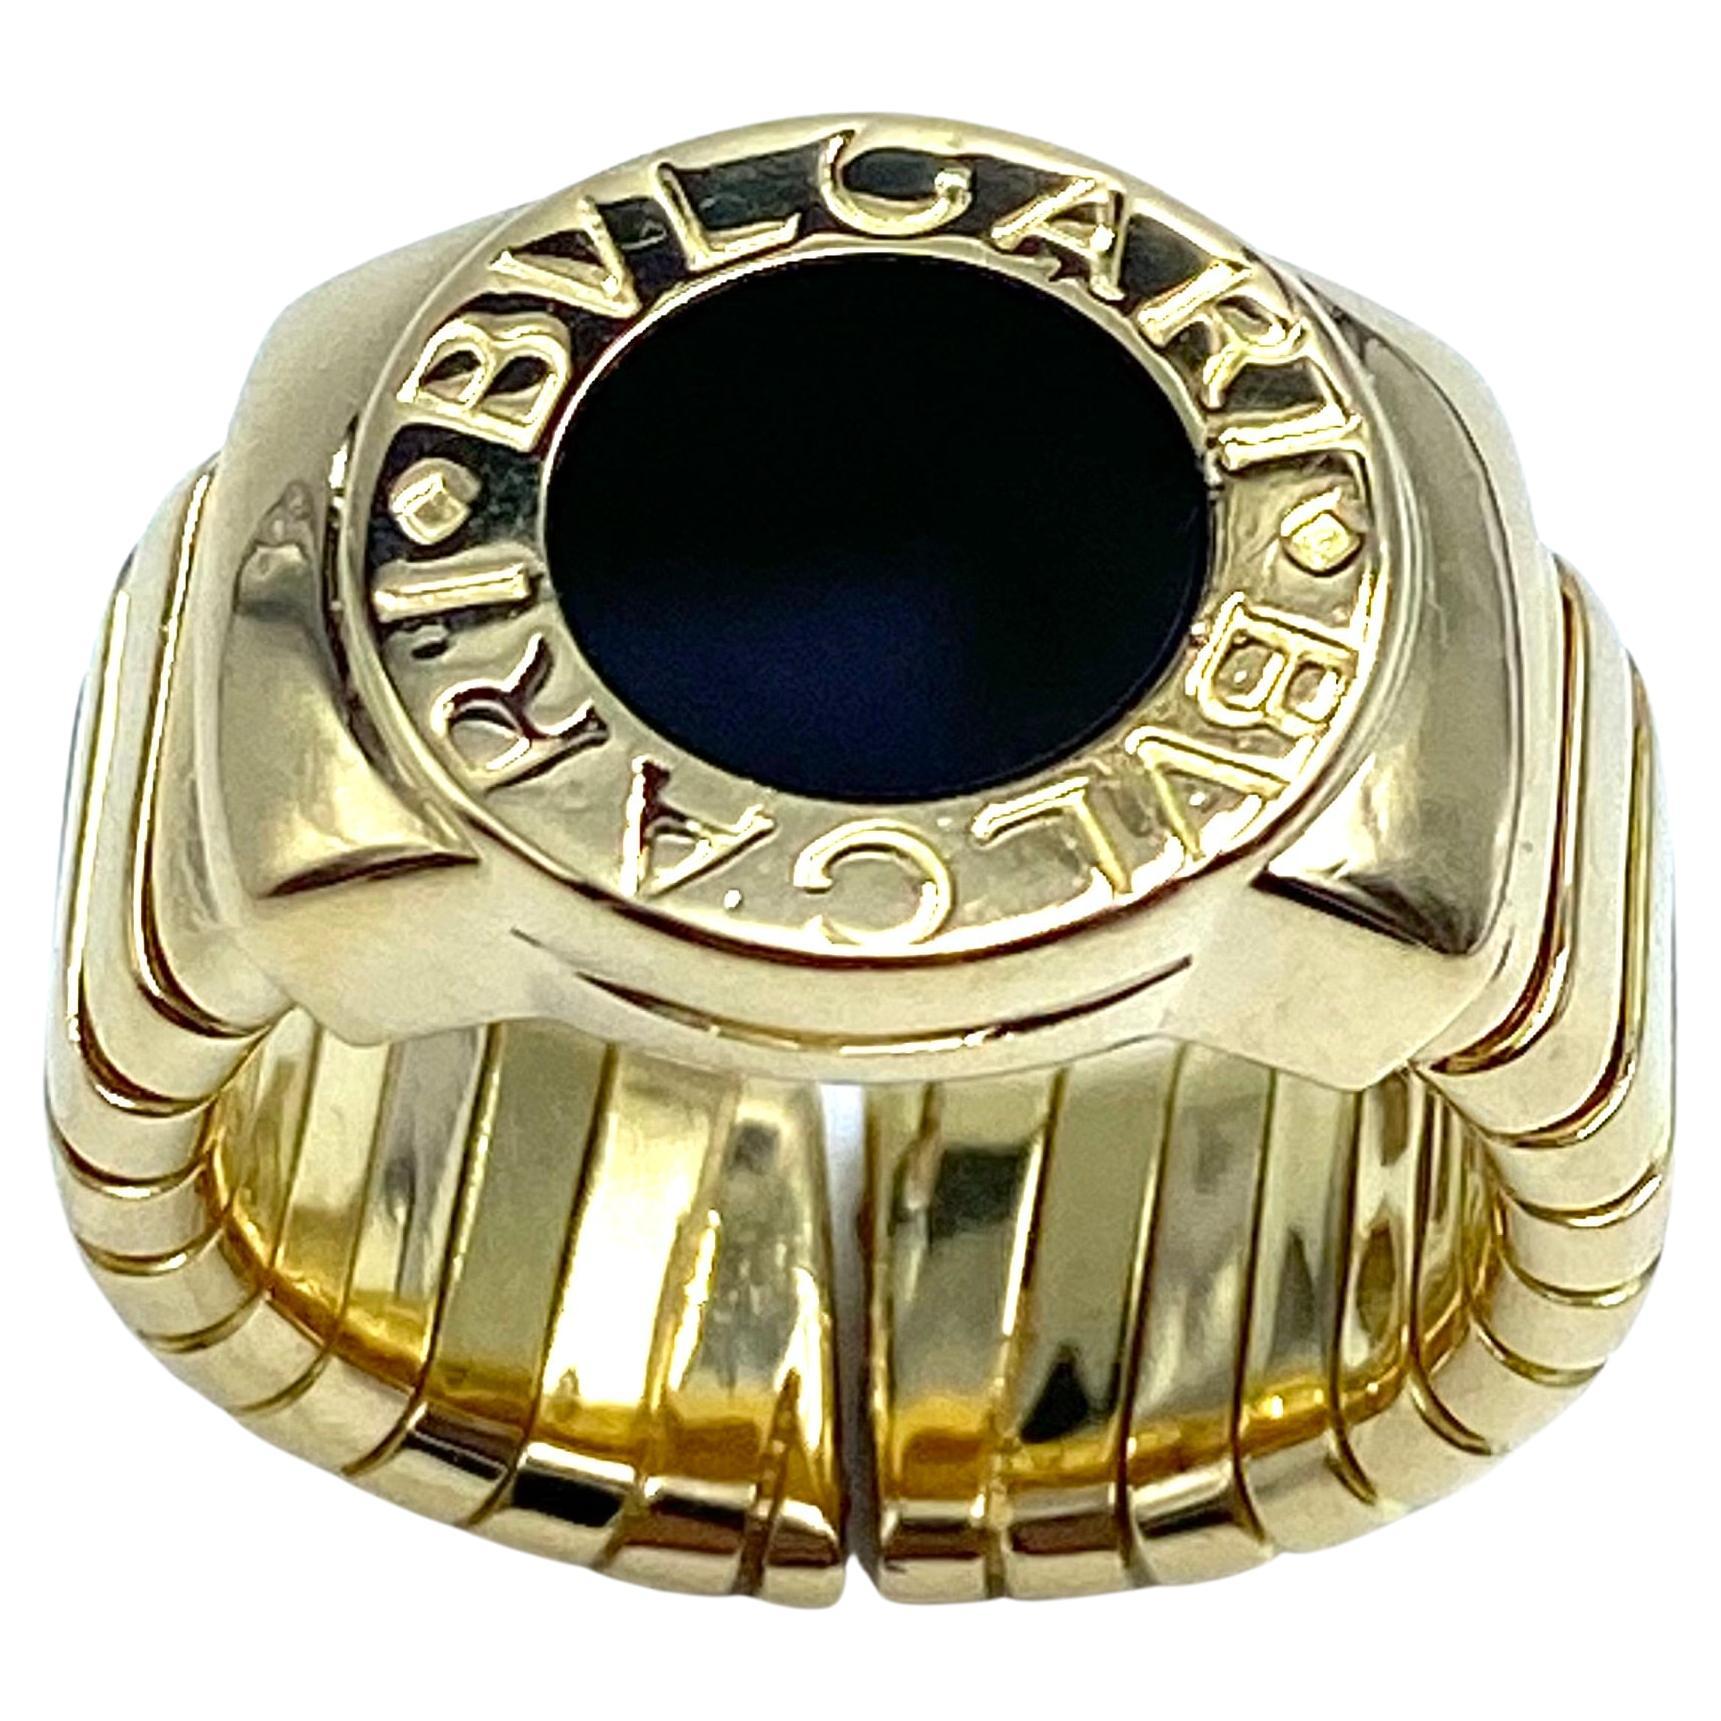 Bulgari signet ring, in 18kt yellow gold with black onyx, made with the famous Tubogas link.
In perfect condition.
Size US 5.5 adjustable and adaptable up to 4 more sizes.
Comes with original leather case.